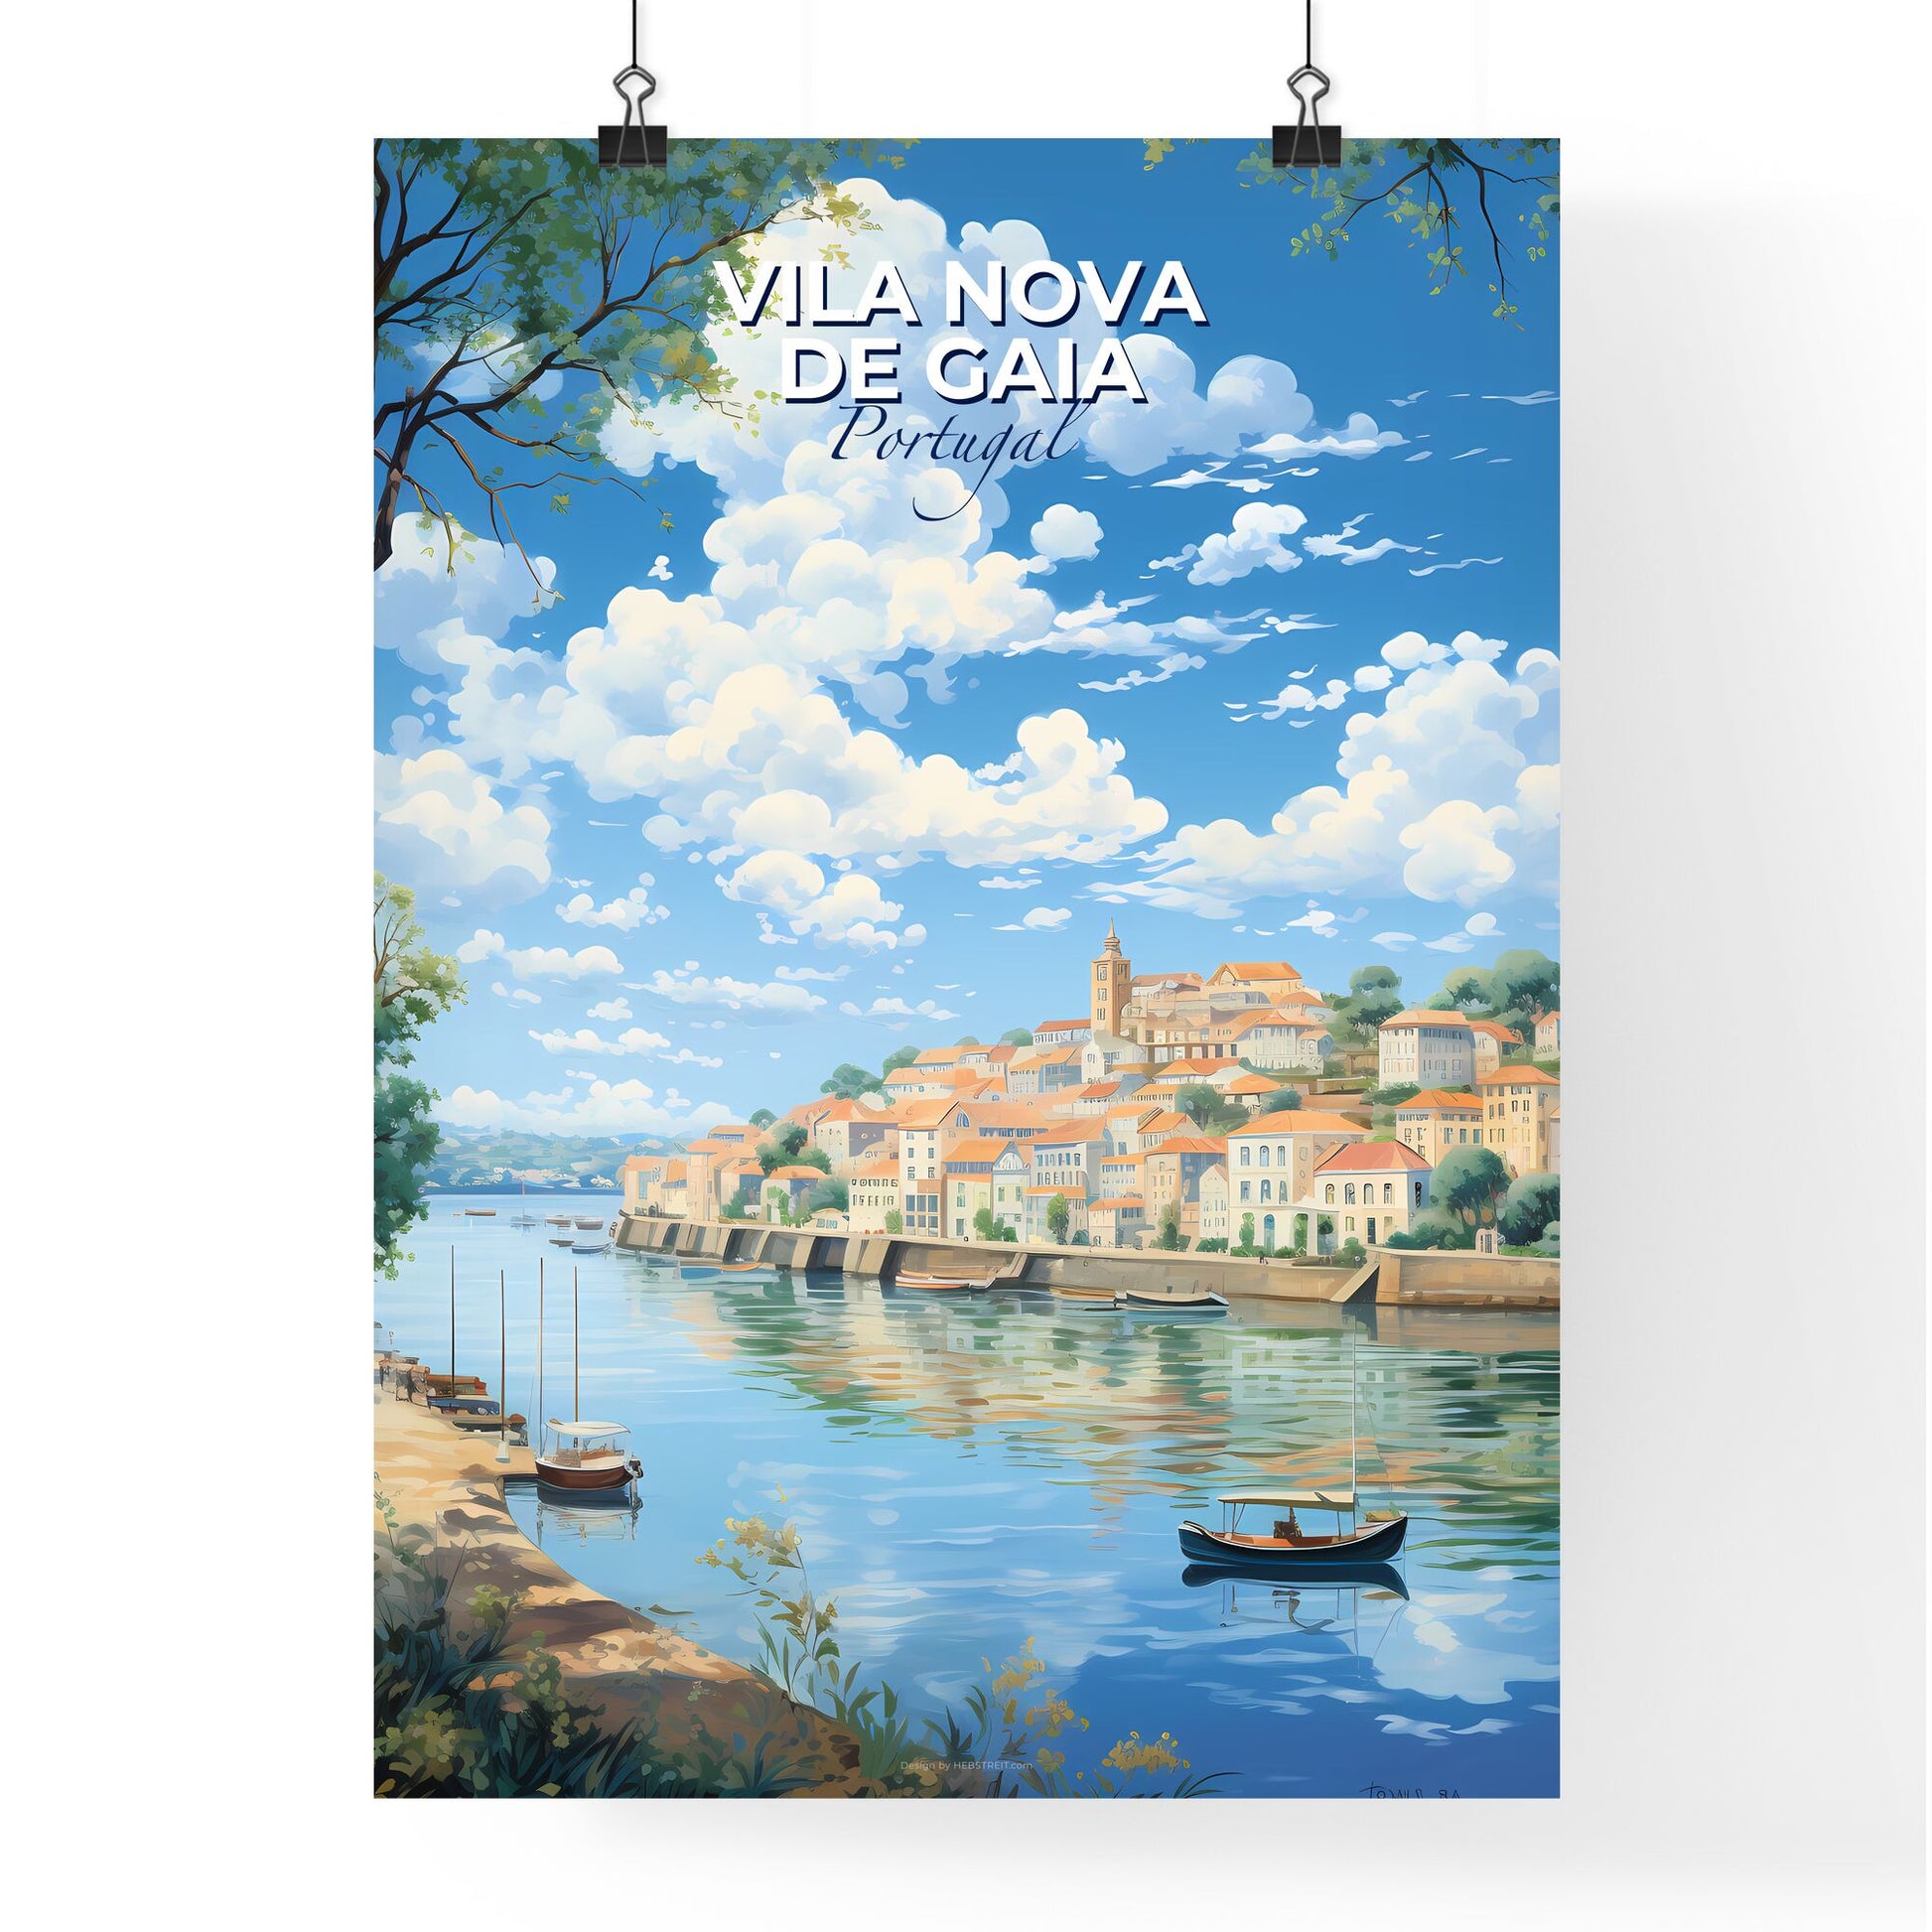 Vila Nova de Gaia Portugal Skyline - A Water Way With Boats And Buildings On The Side - Customizable Travel Gift Default Title